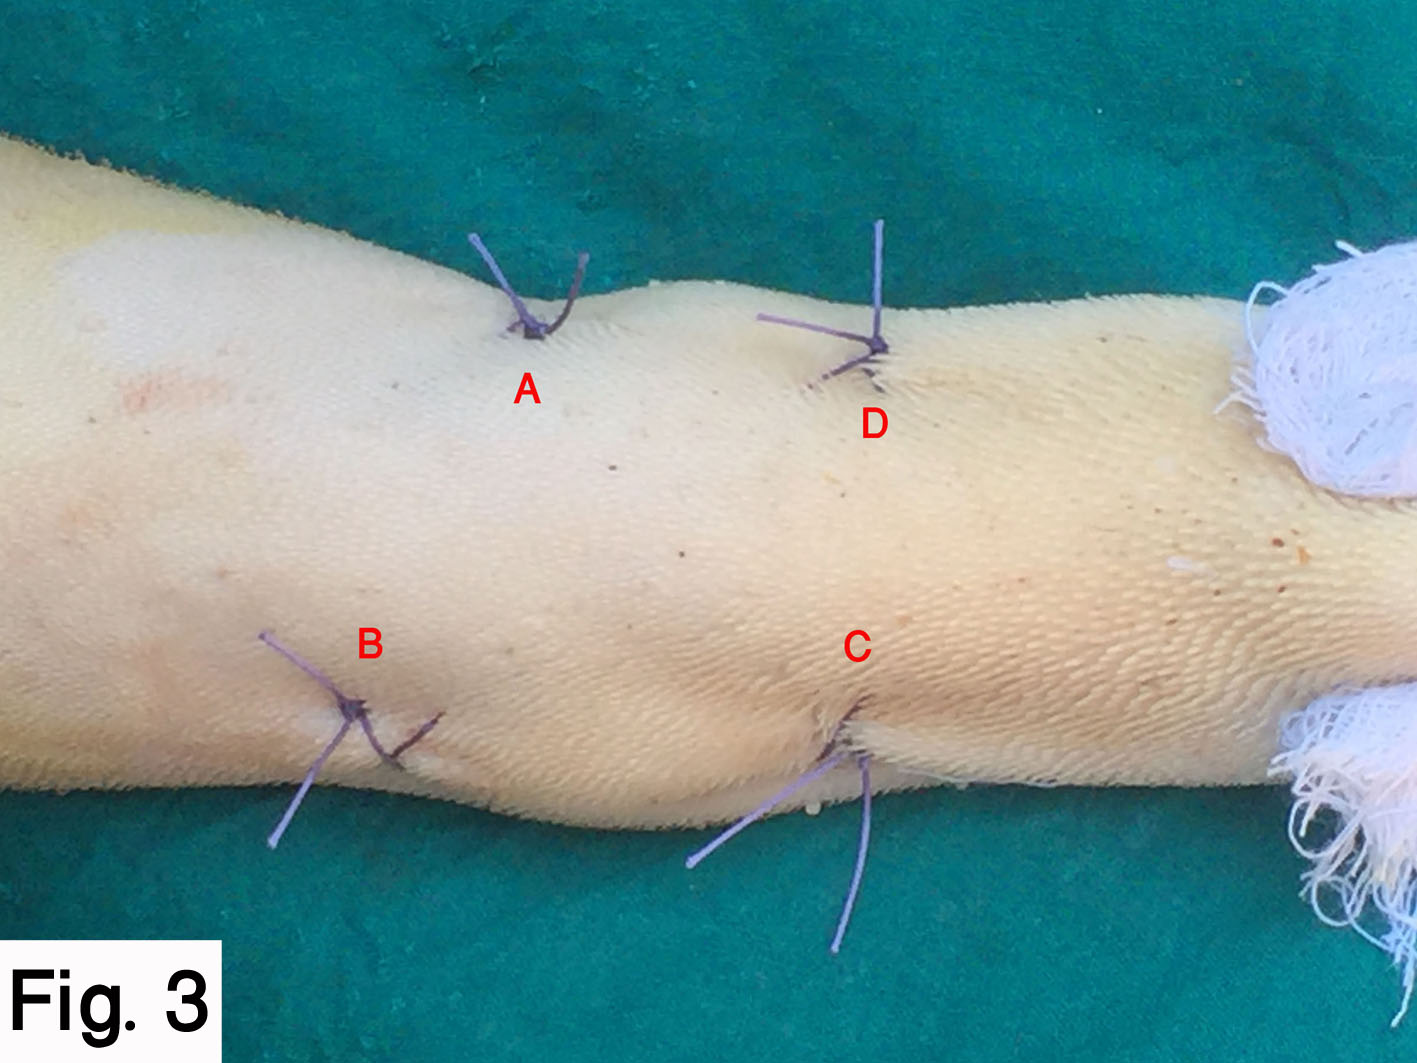 Intra-lingual suture pattern for prevention of self-suckling in cows